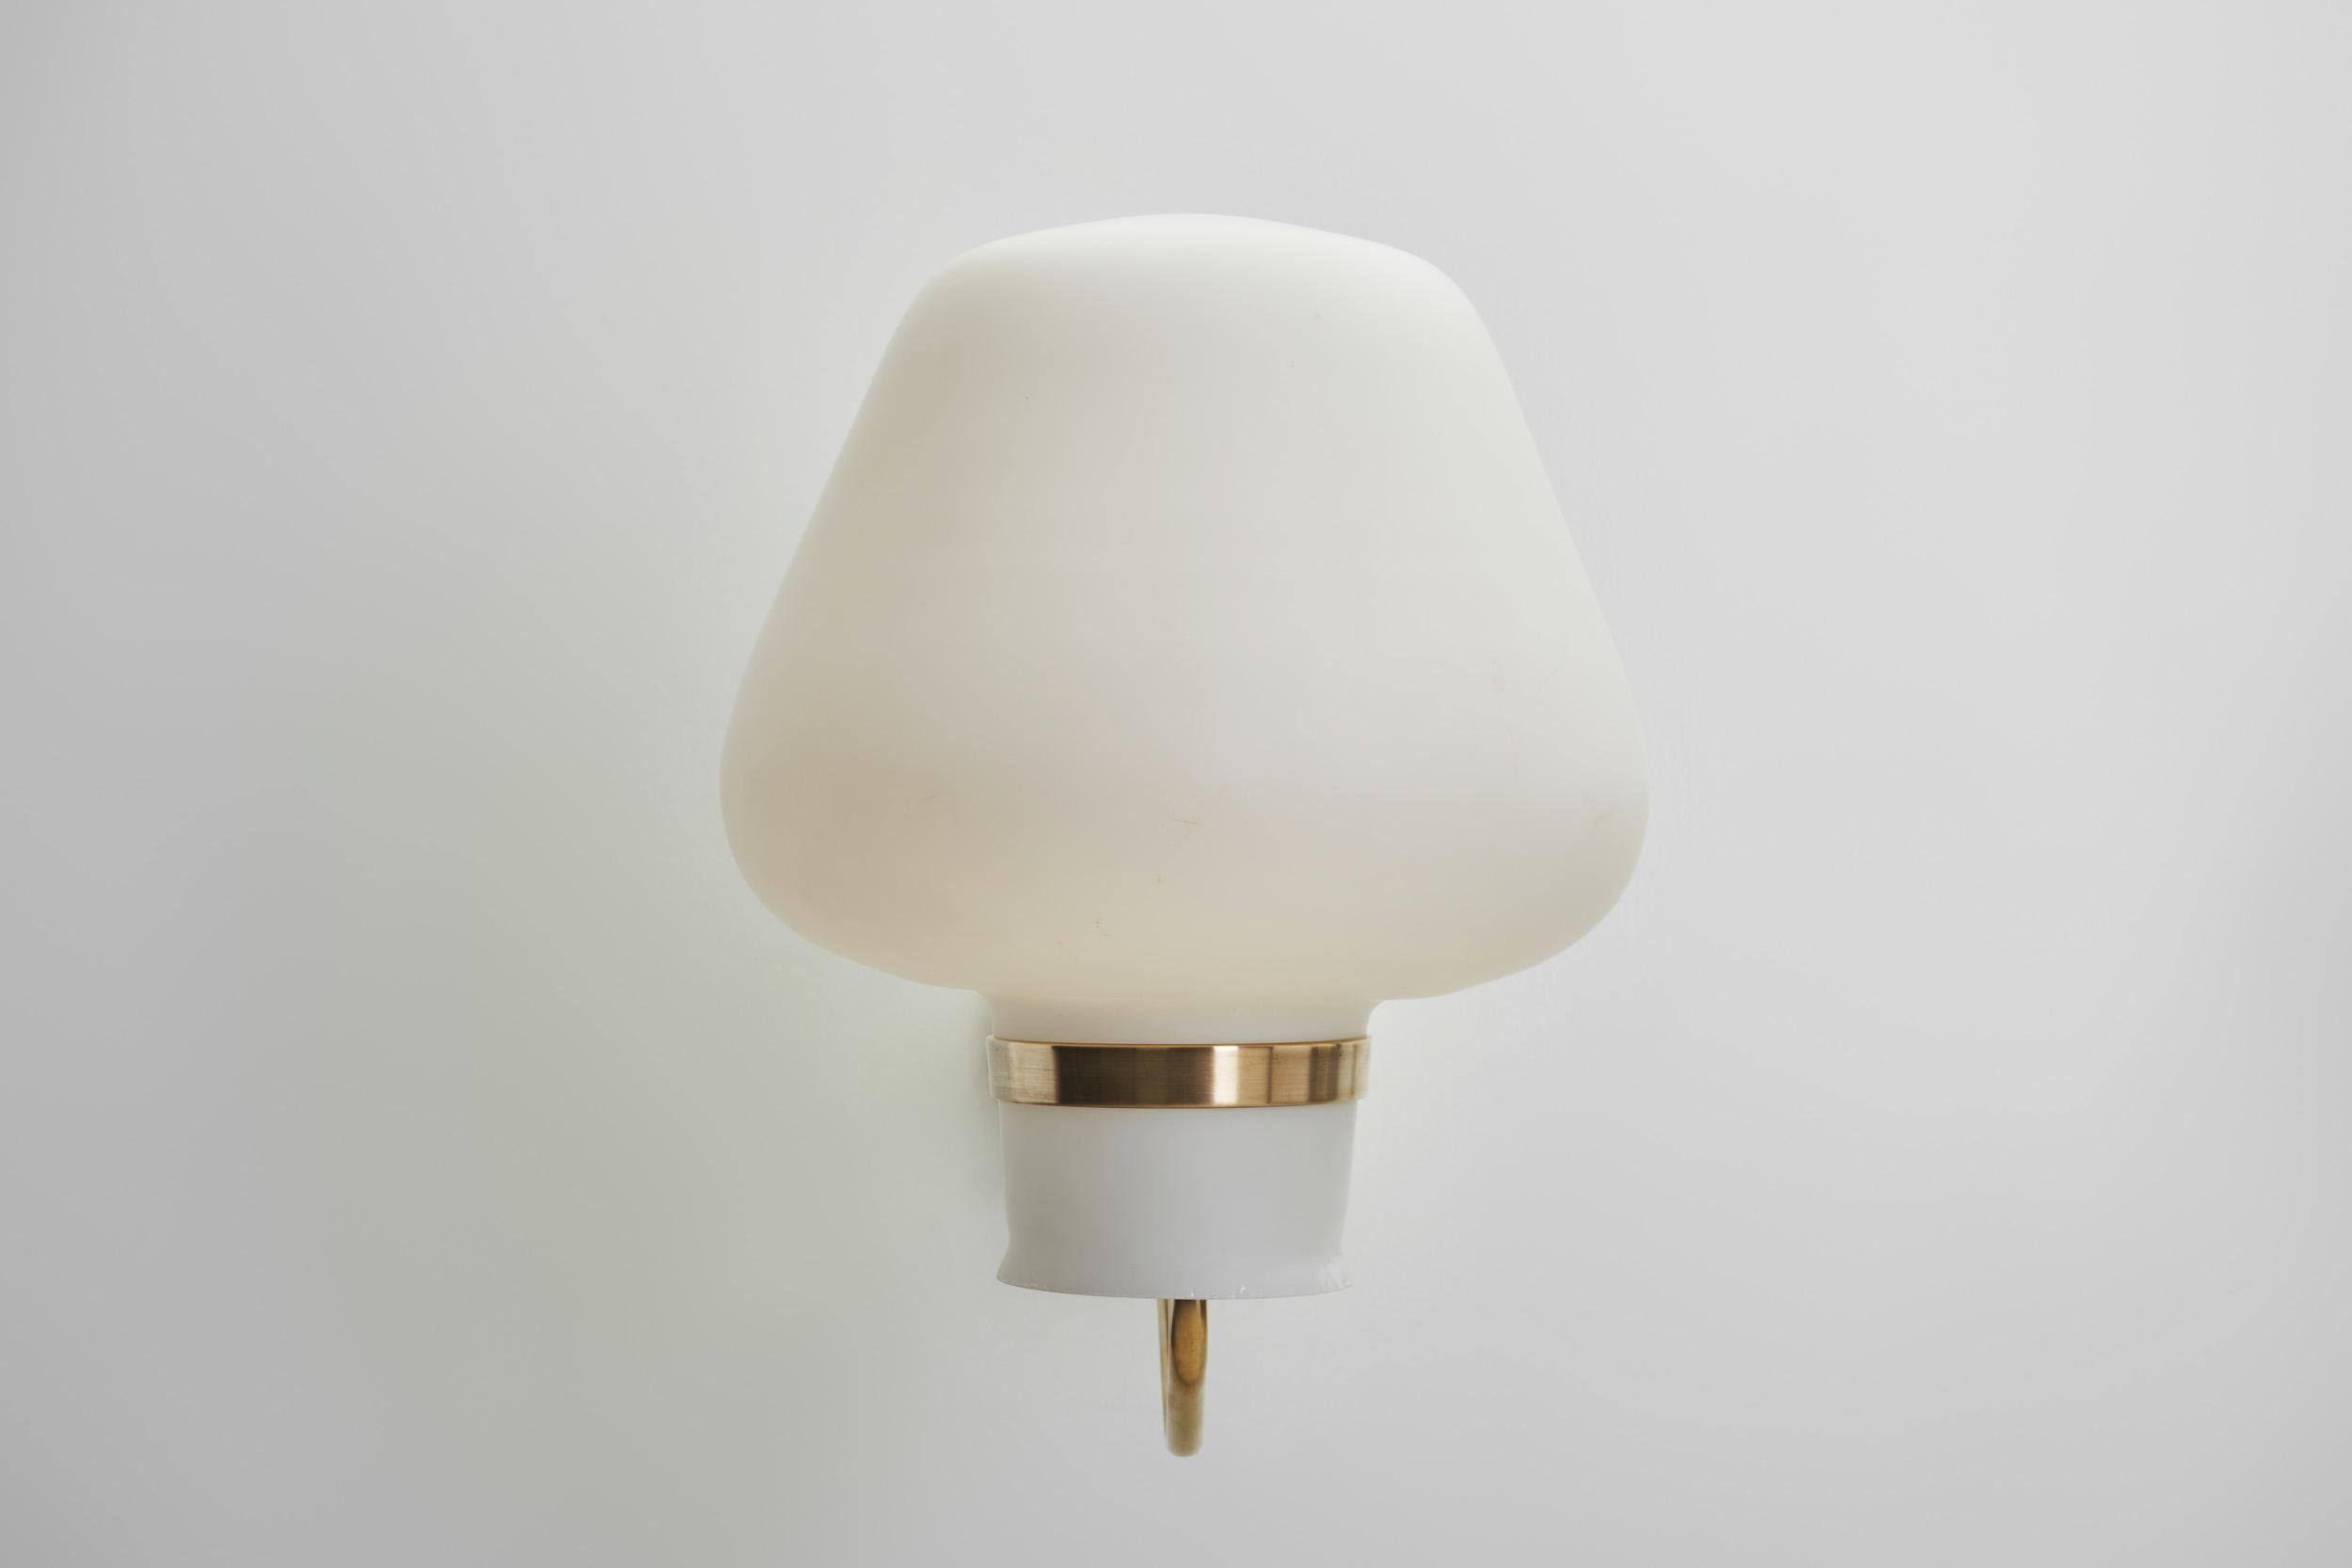 Large Opaline Glass and Brass Wall Lamps by Erik Gunnar Asplund, Sweden 1940s For Sale 2